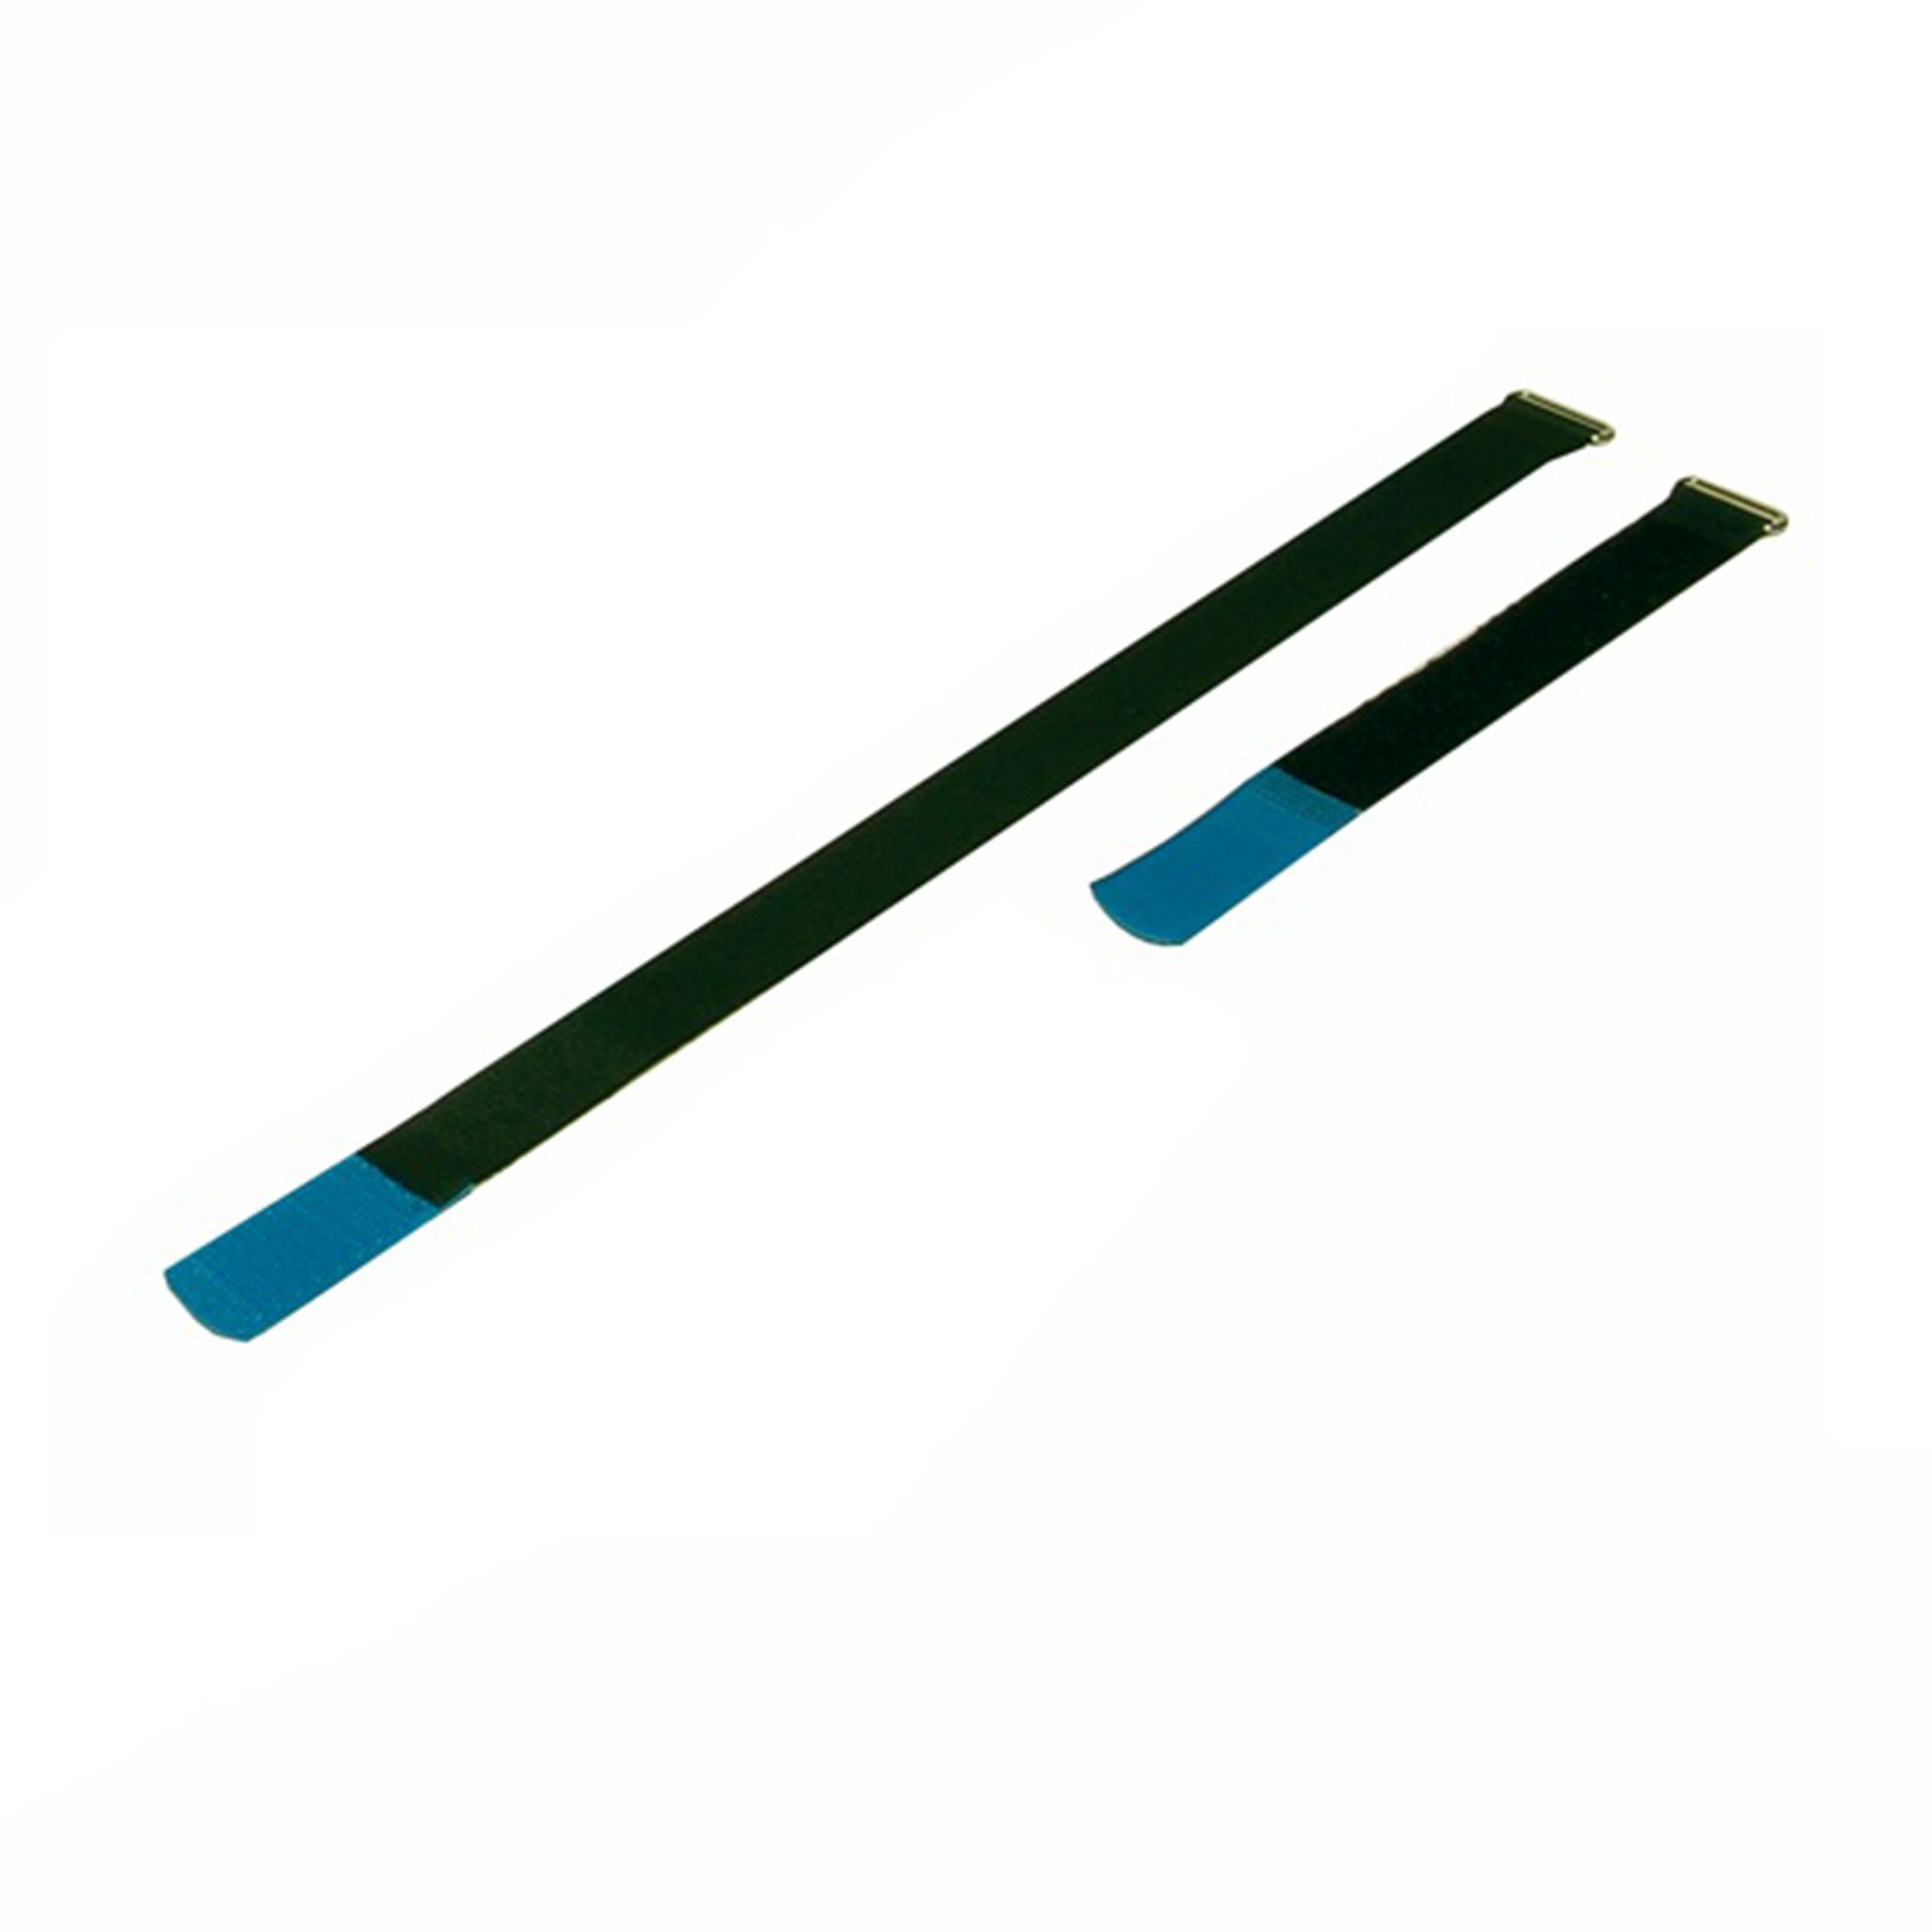 Cable Tie 410x25mm with Hook Blue, (10 pieces) - a2541h